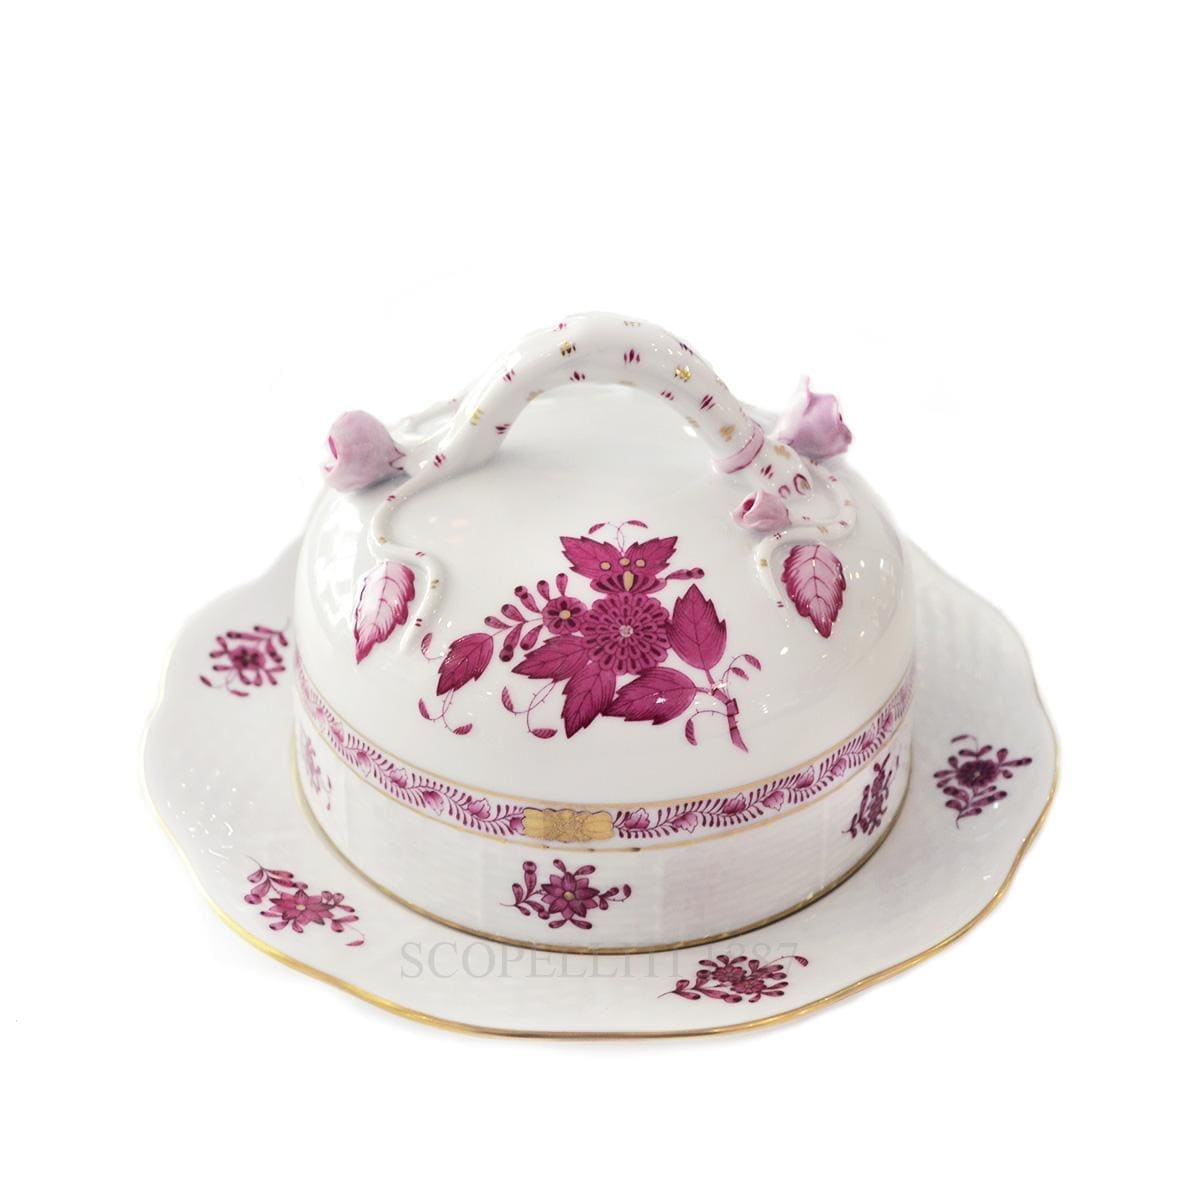 herend porcelain apponyi butter dish handpainted pink